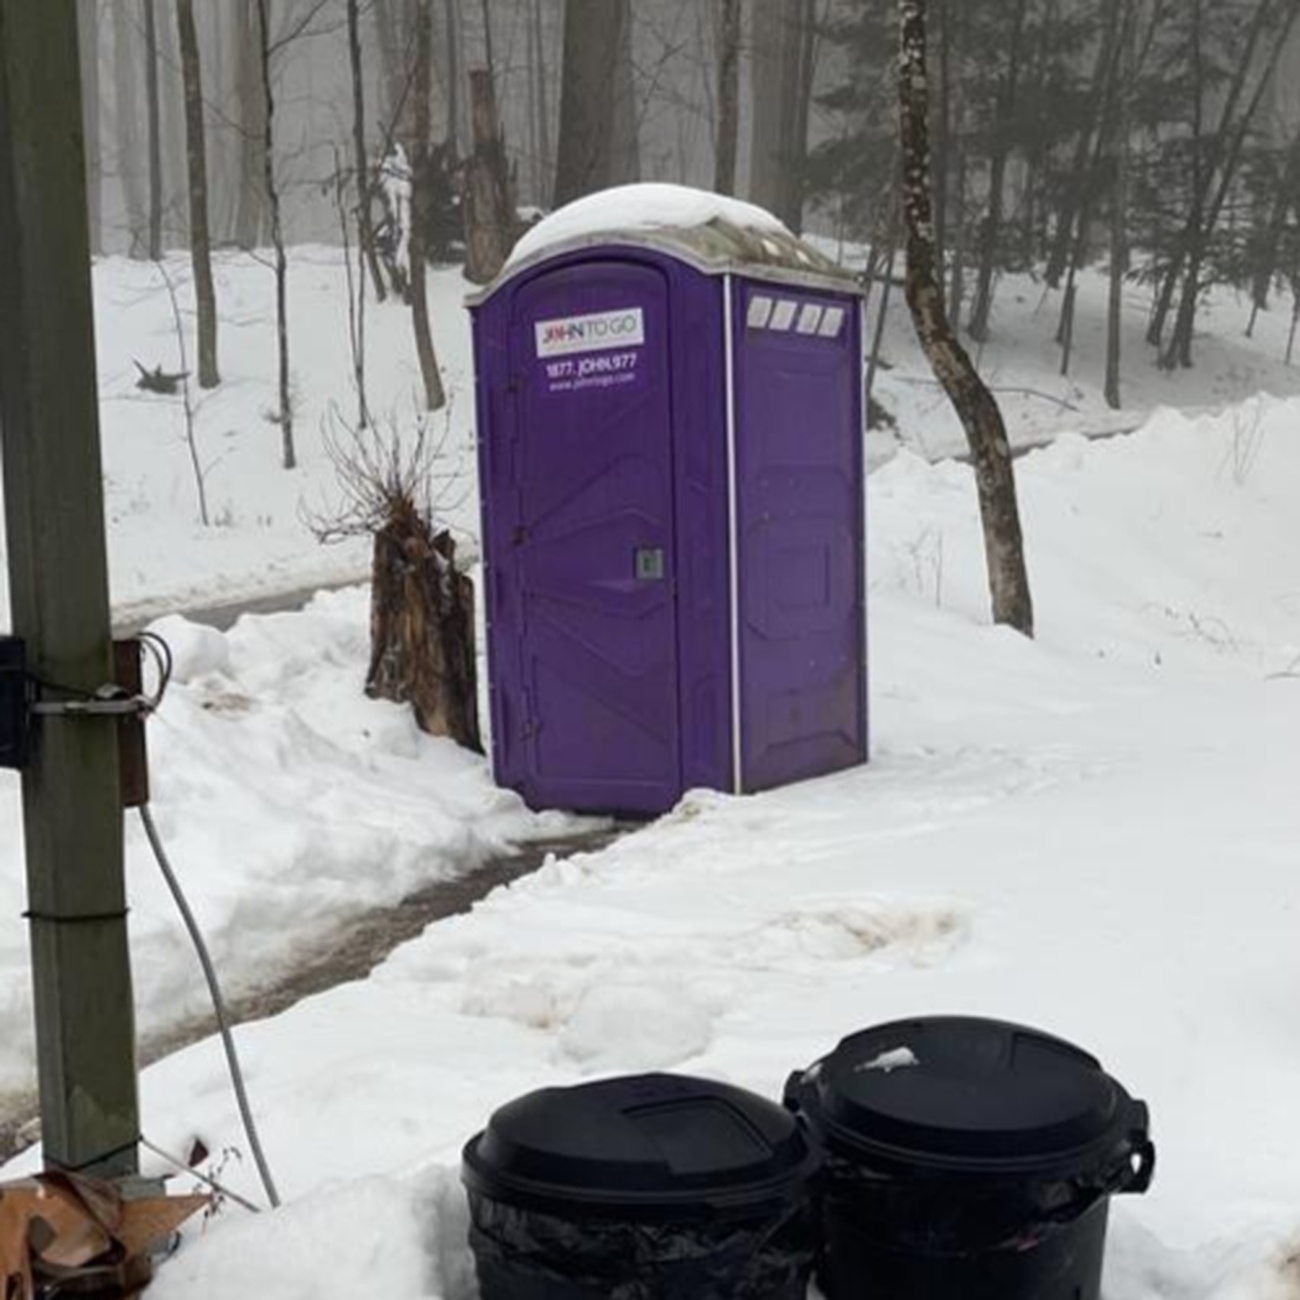 Portable toilet rental for disaster relief